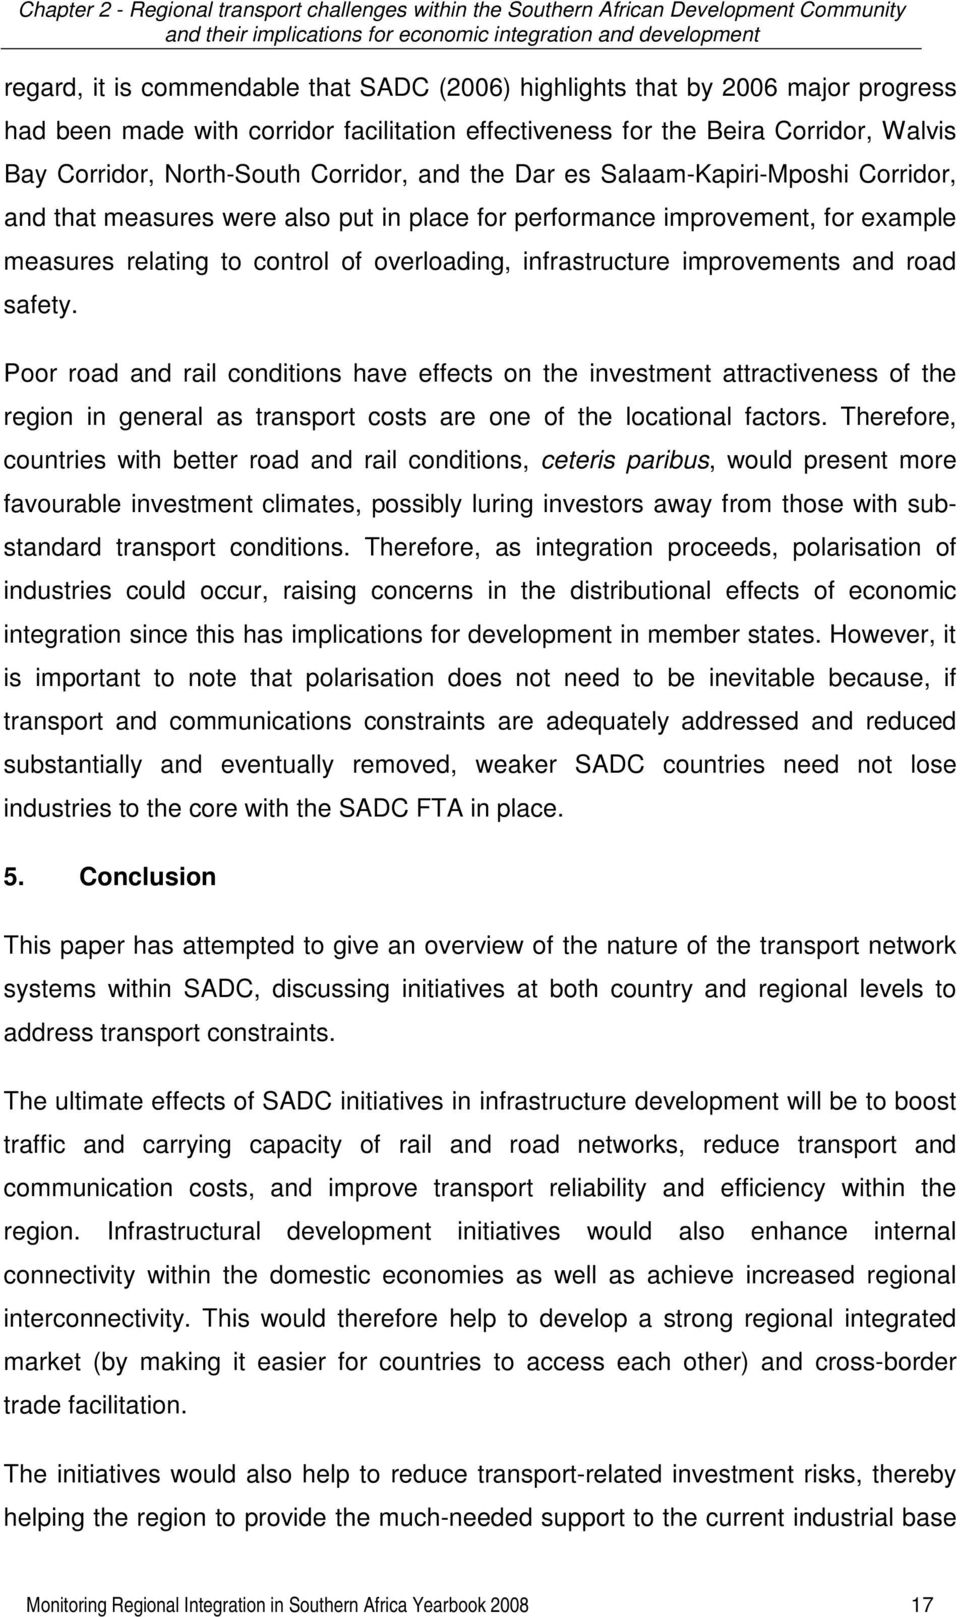 improvements and road safety. Poor road and rail conditions have effects on the investment attractiveness of the region in general as transport costs are one of the locational factors.